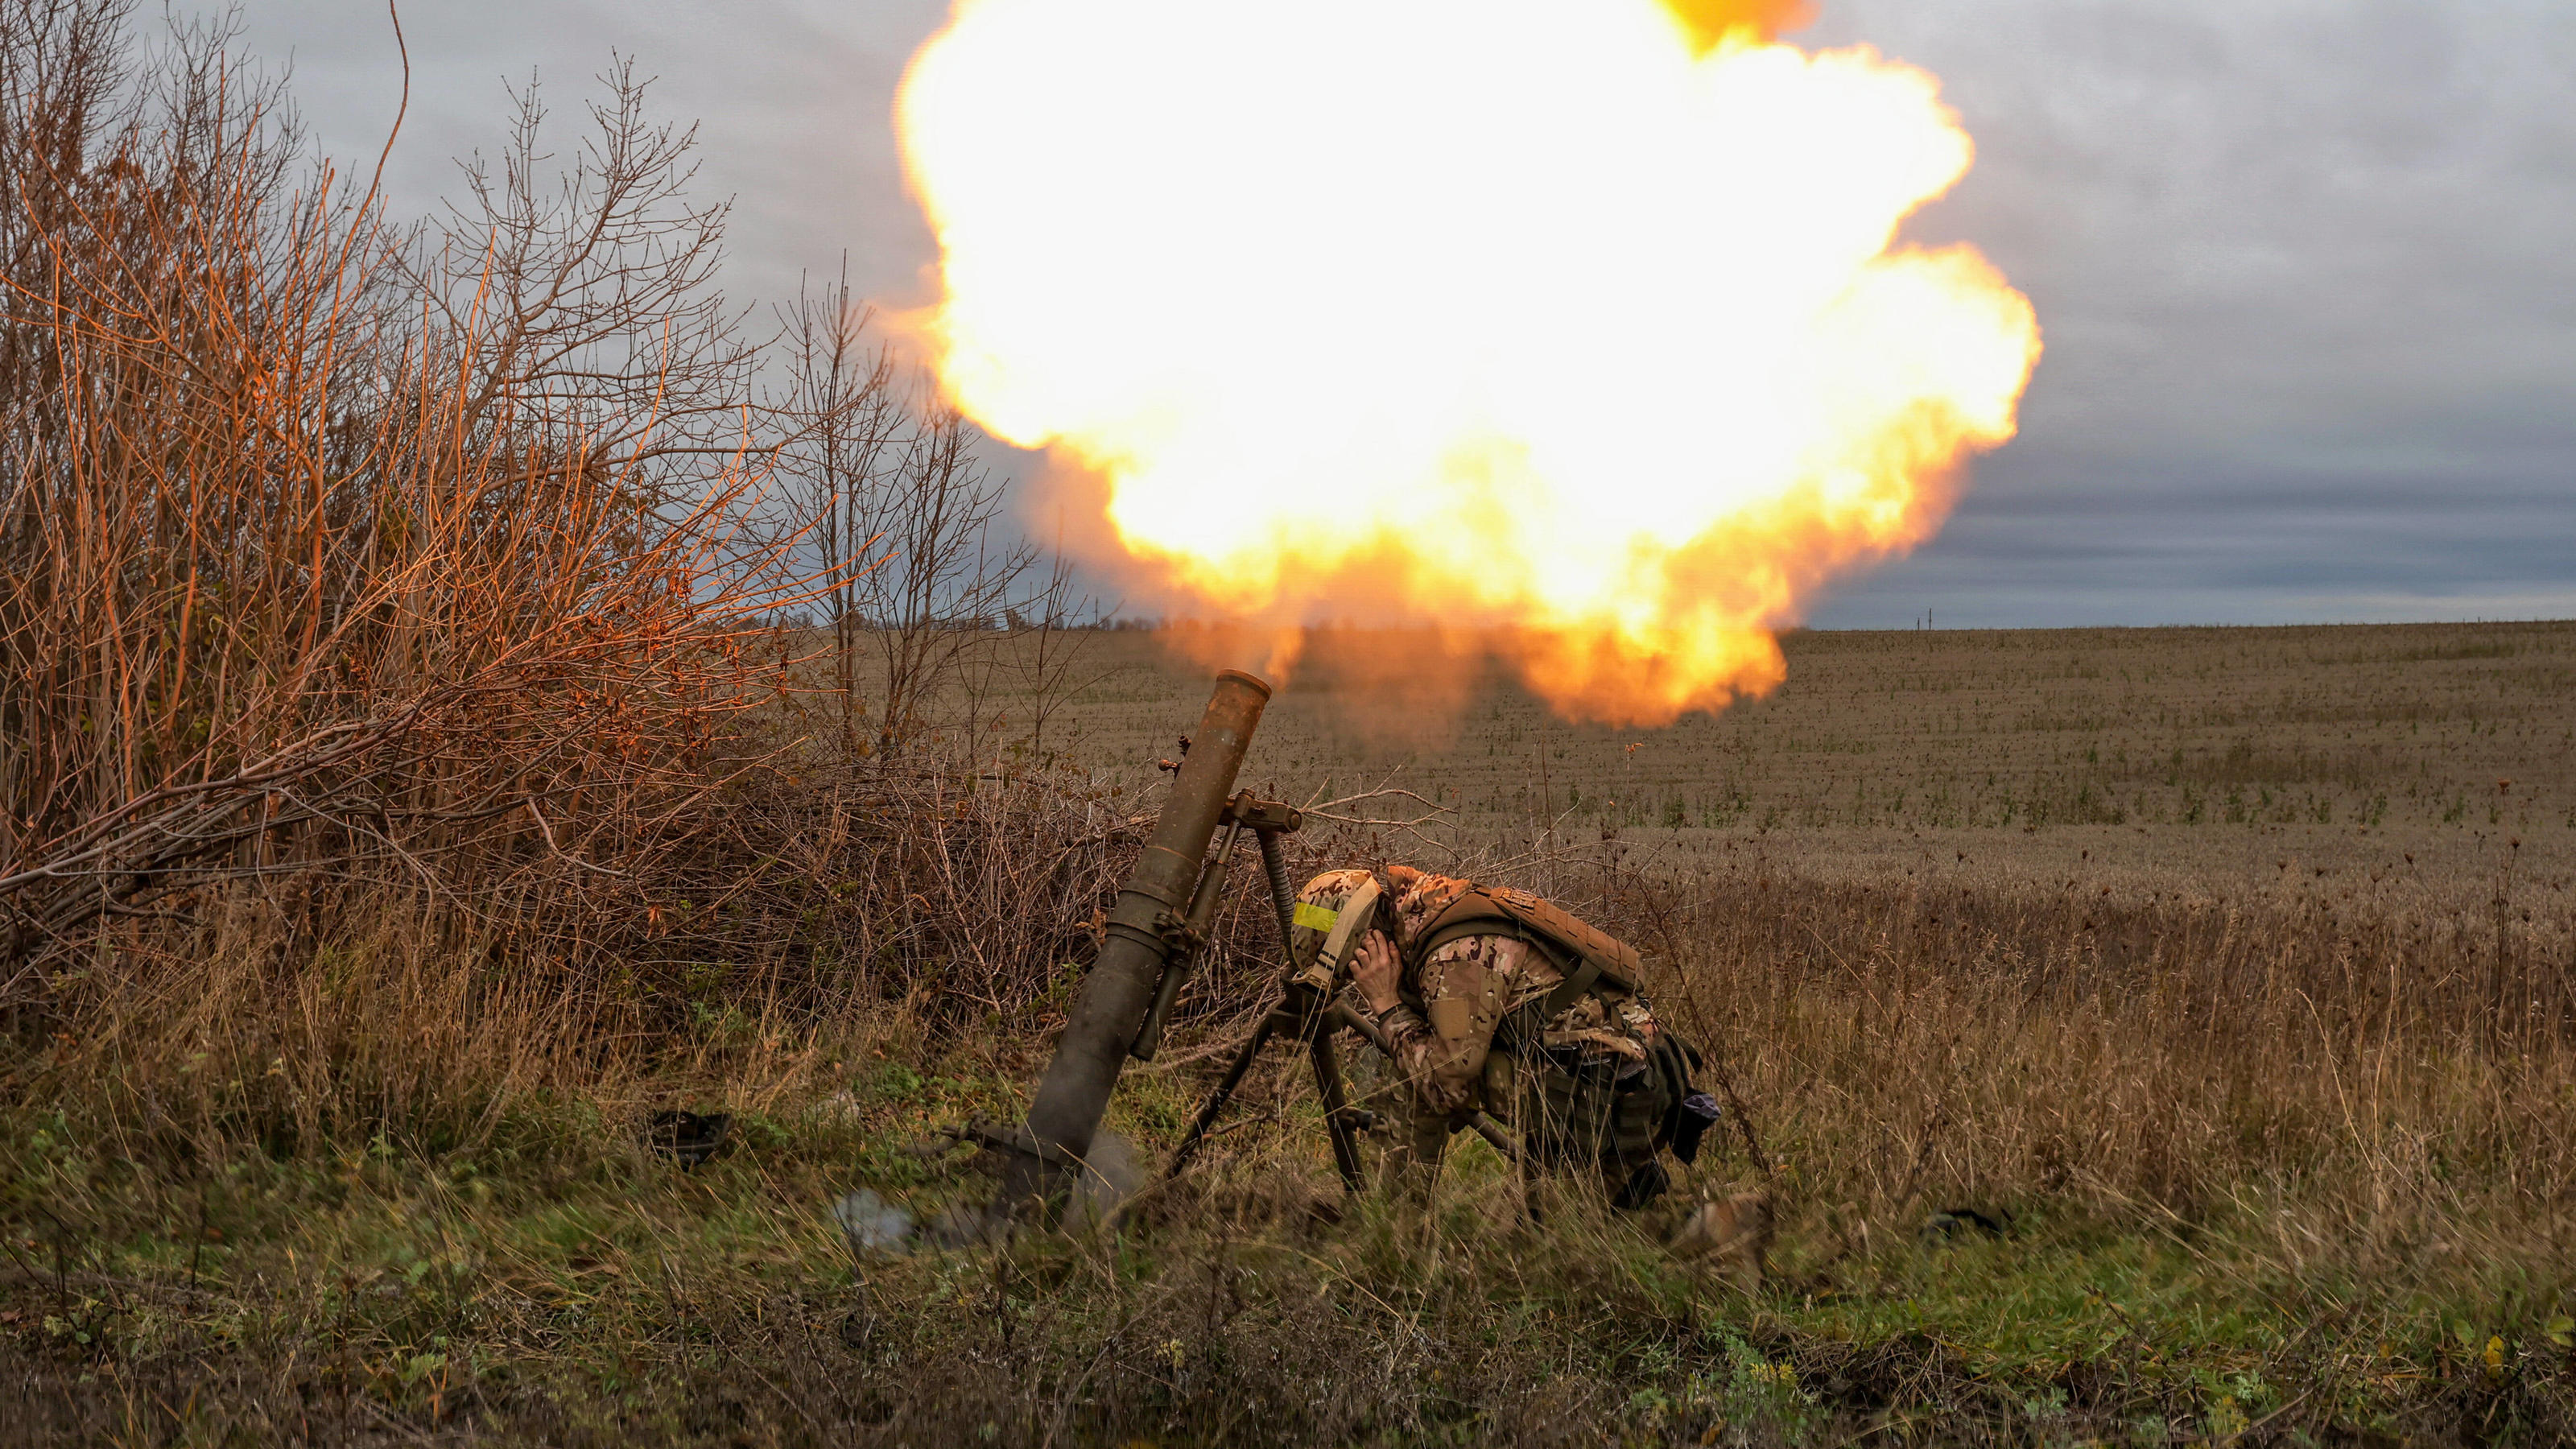  KHARKIV REGION, UKRAINE - OCTOBER 25, 2022 - An artillery unit of Ukraine s National Guard employs a shoot-and-scoot tactic to attack Russian targets with mortar shells, Kharkiv Region, northeastern Ukraine. Ukrainian mortar unit in Kharkiv Region P